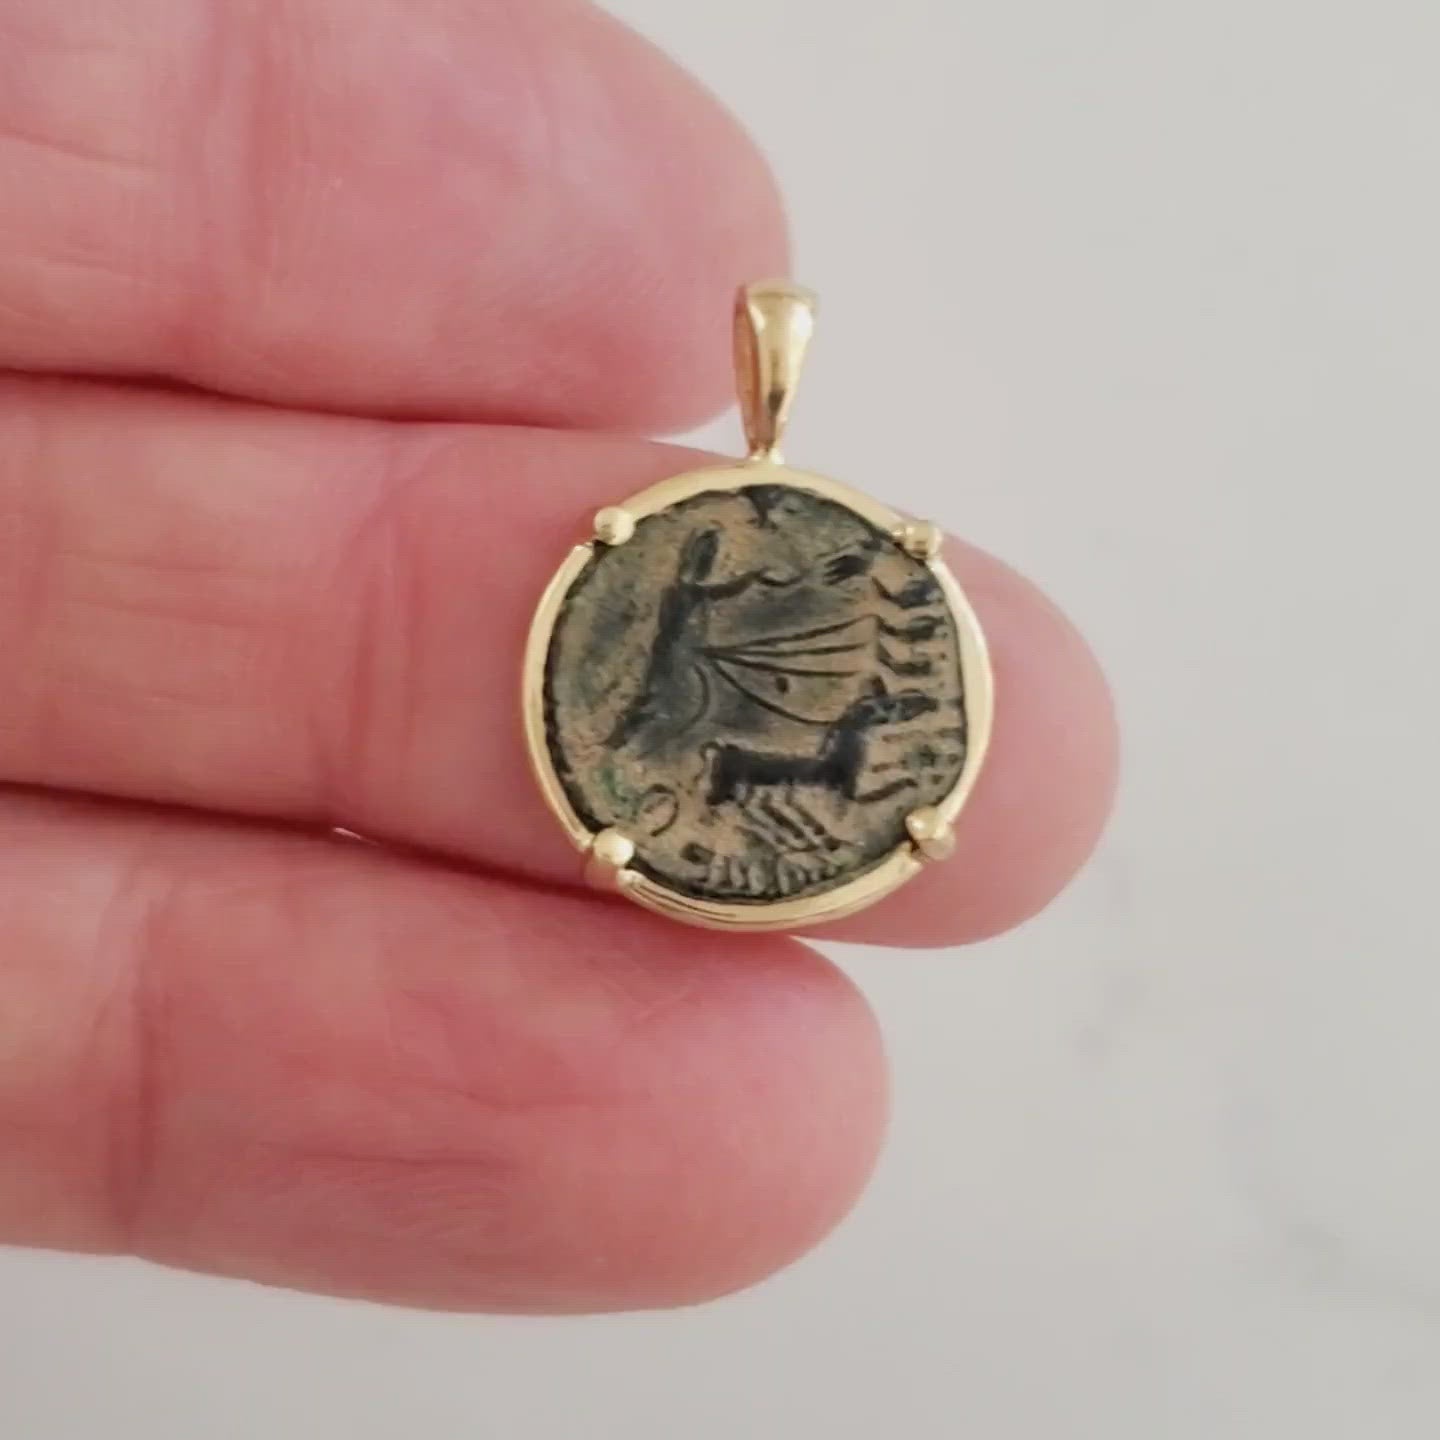 Ancient Roman Bronze Coin Constantine Commemorative Hand of God 4 Horse Chariot Constantine Reaching Up God's Hand Reaching Down Veiled Constantine on back Gold Pendant Video